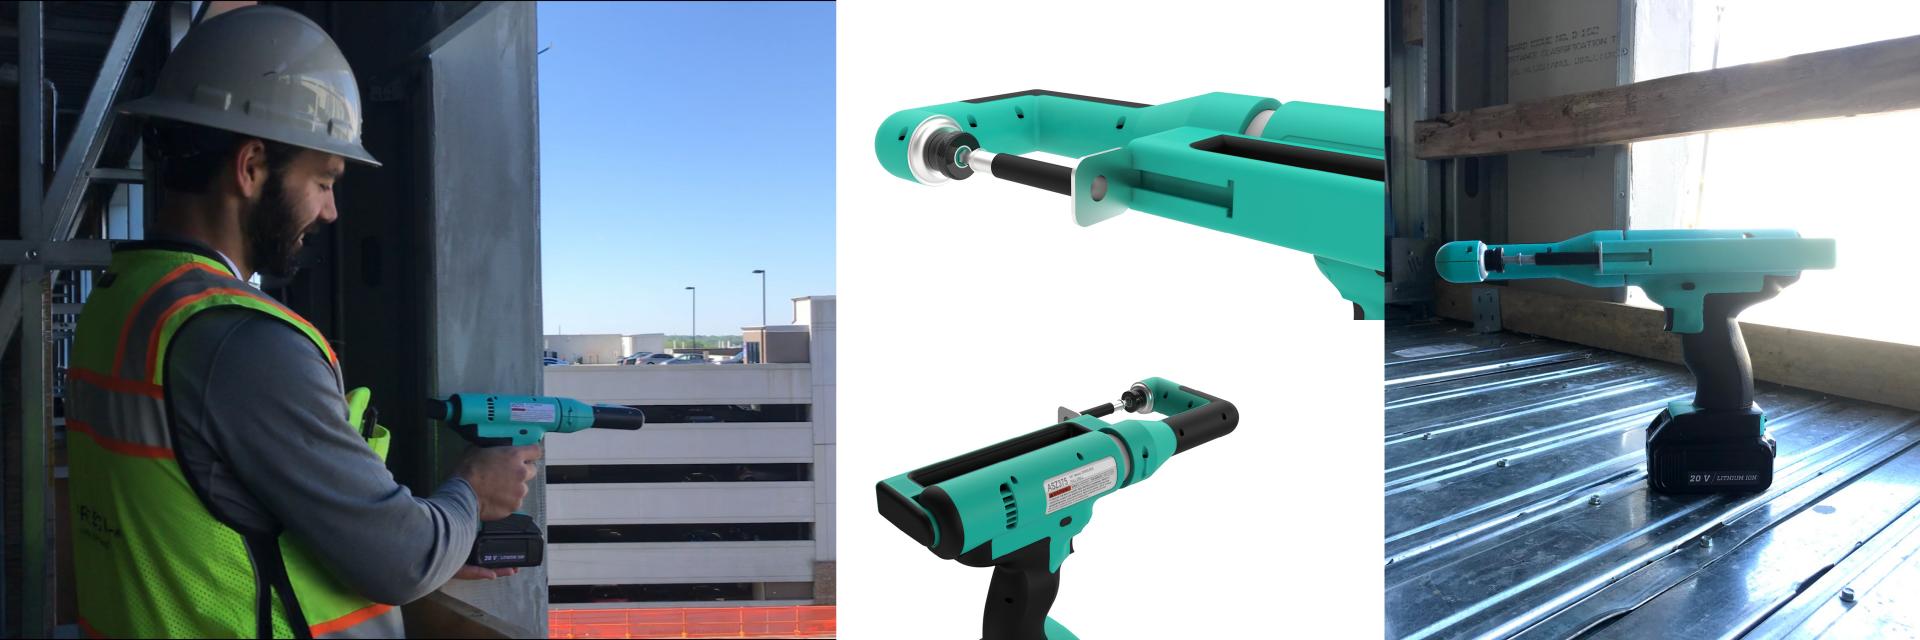 Several renders and images of a teal power tool. 